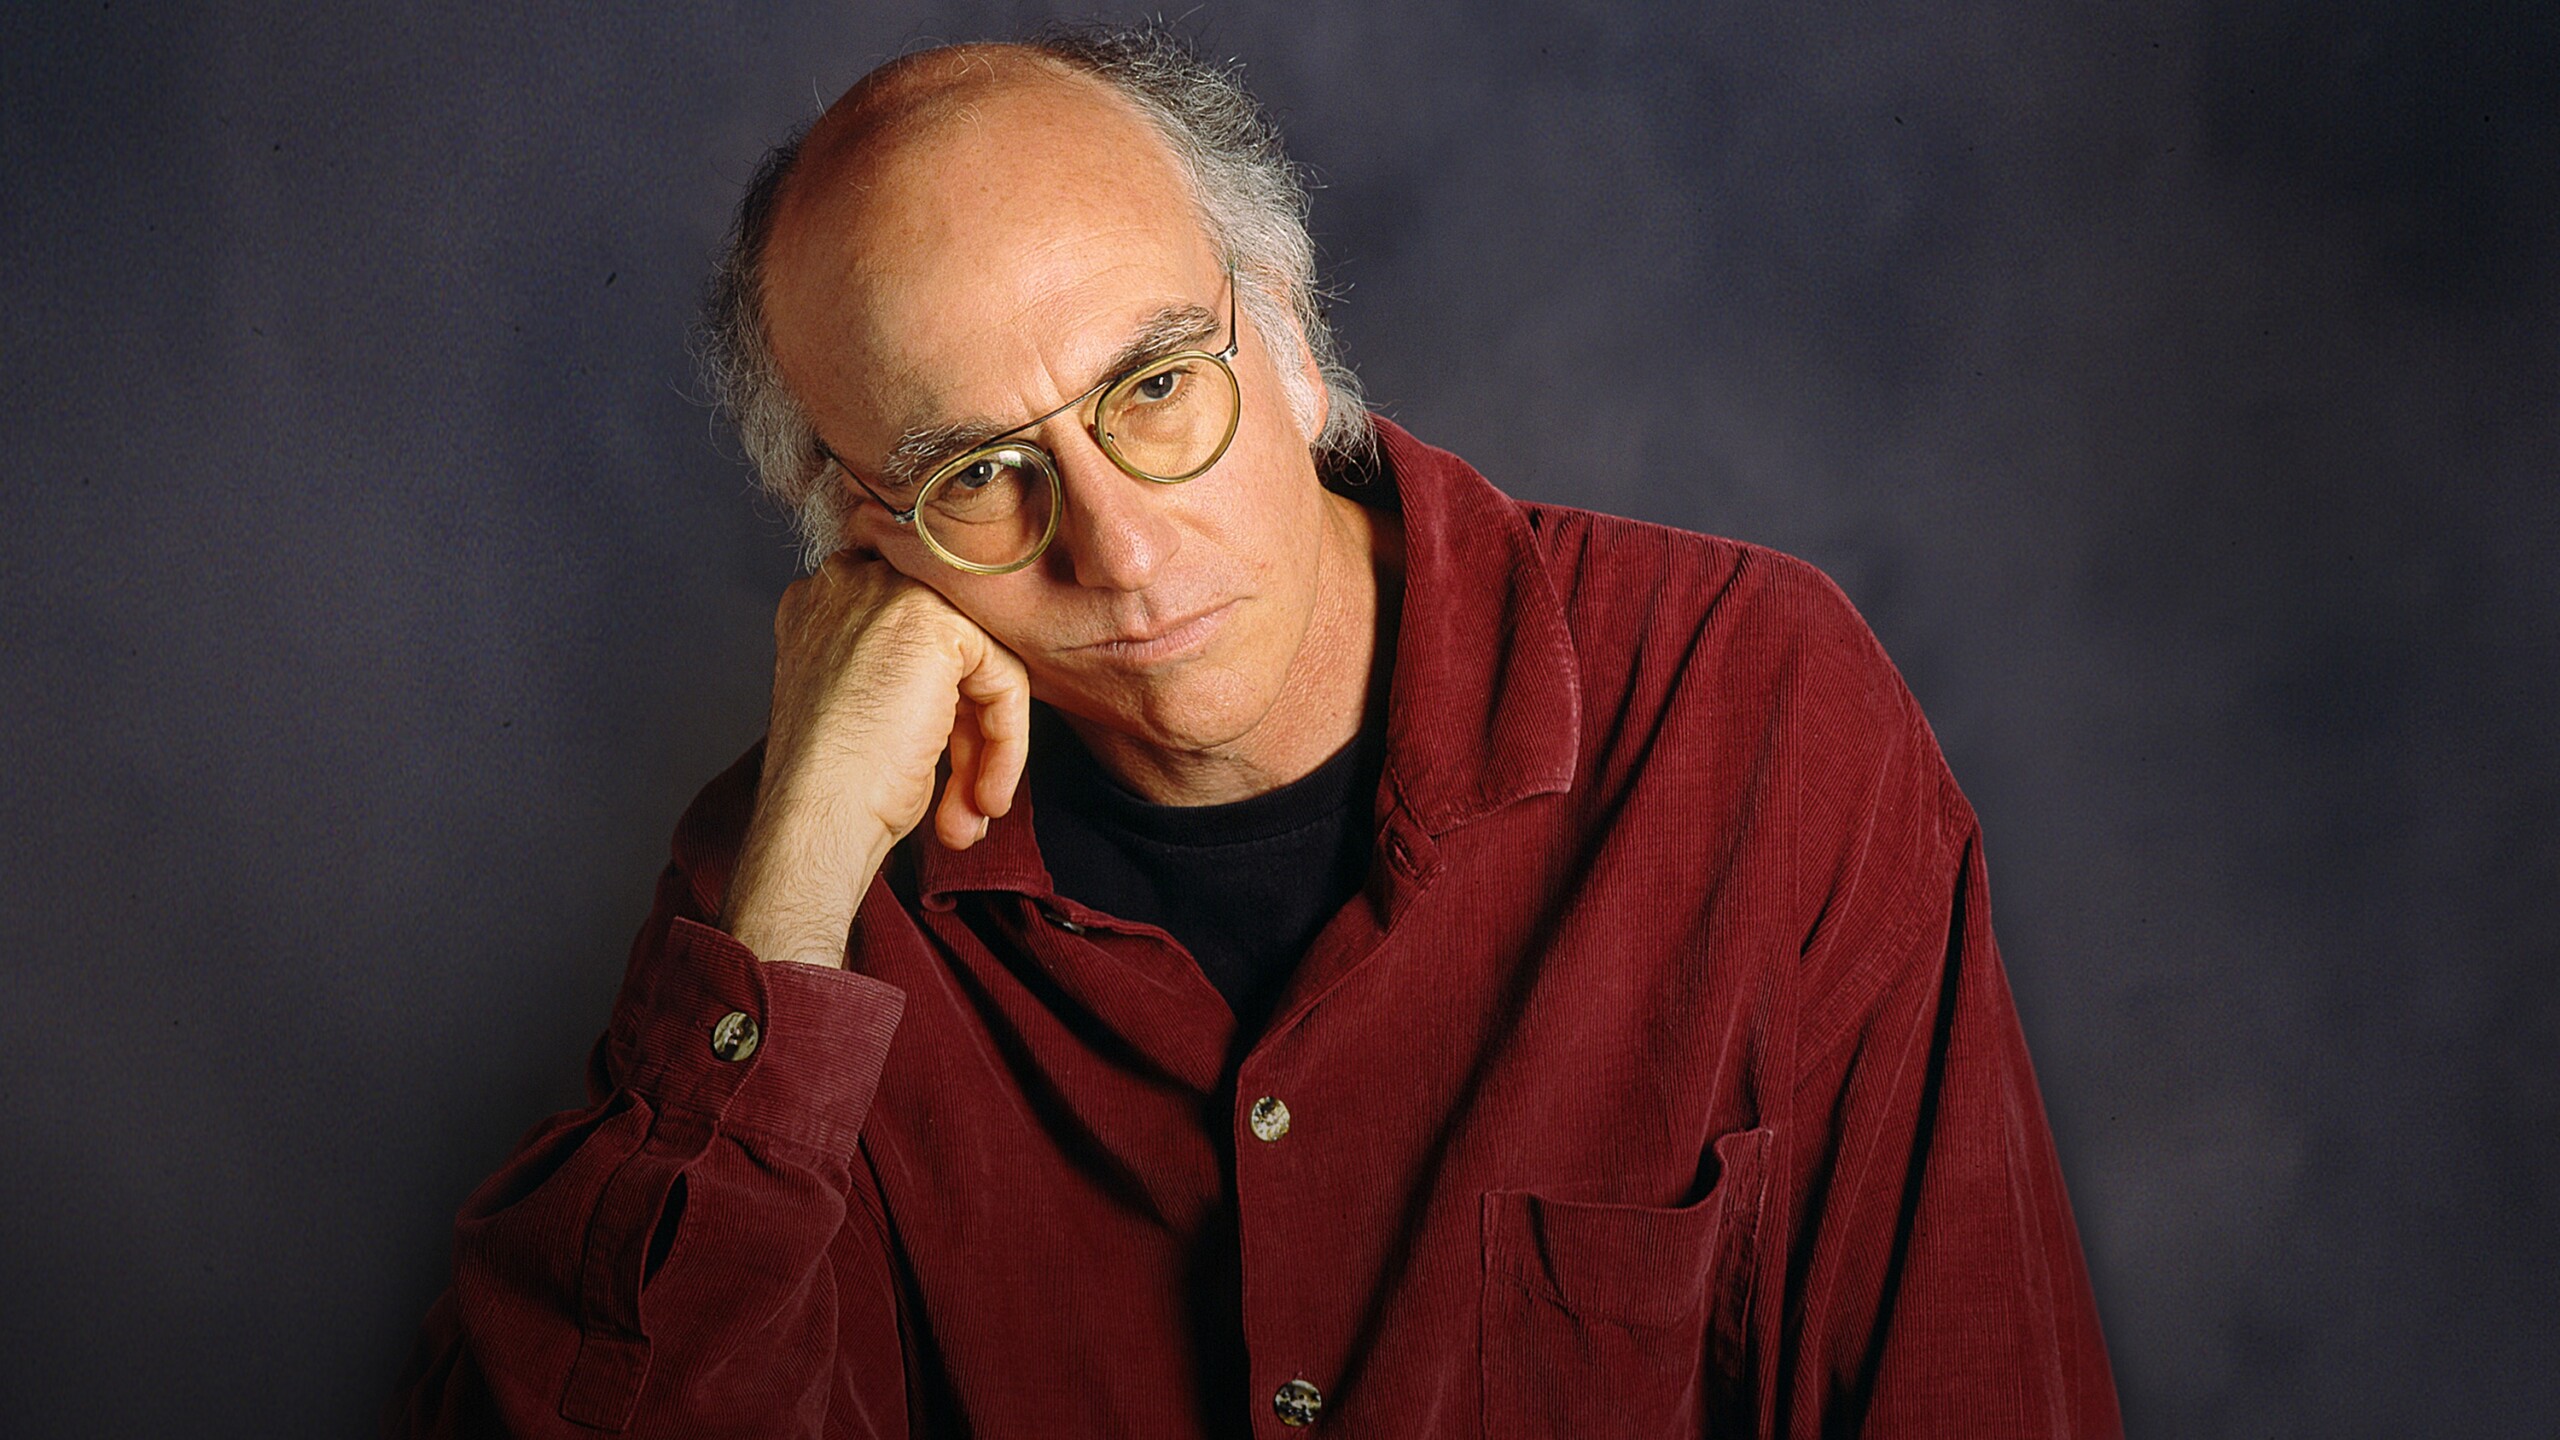 How to Watch 'Curb Your Enthusiasm' Online - Live Stream Season 10